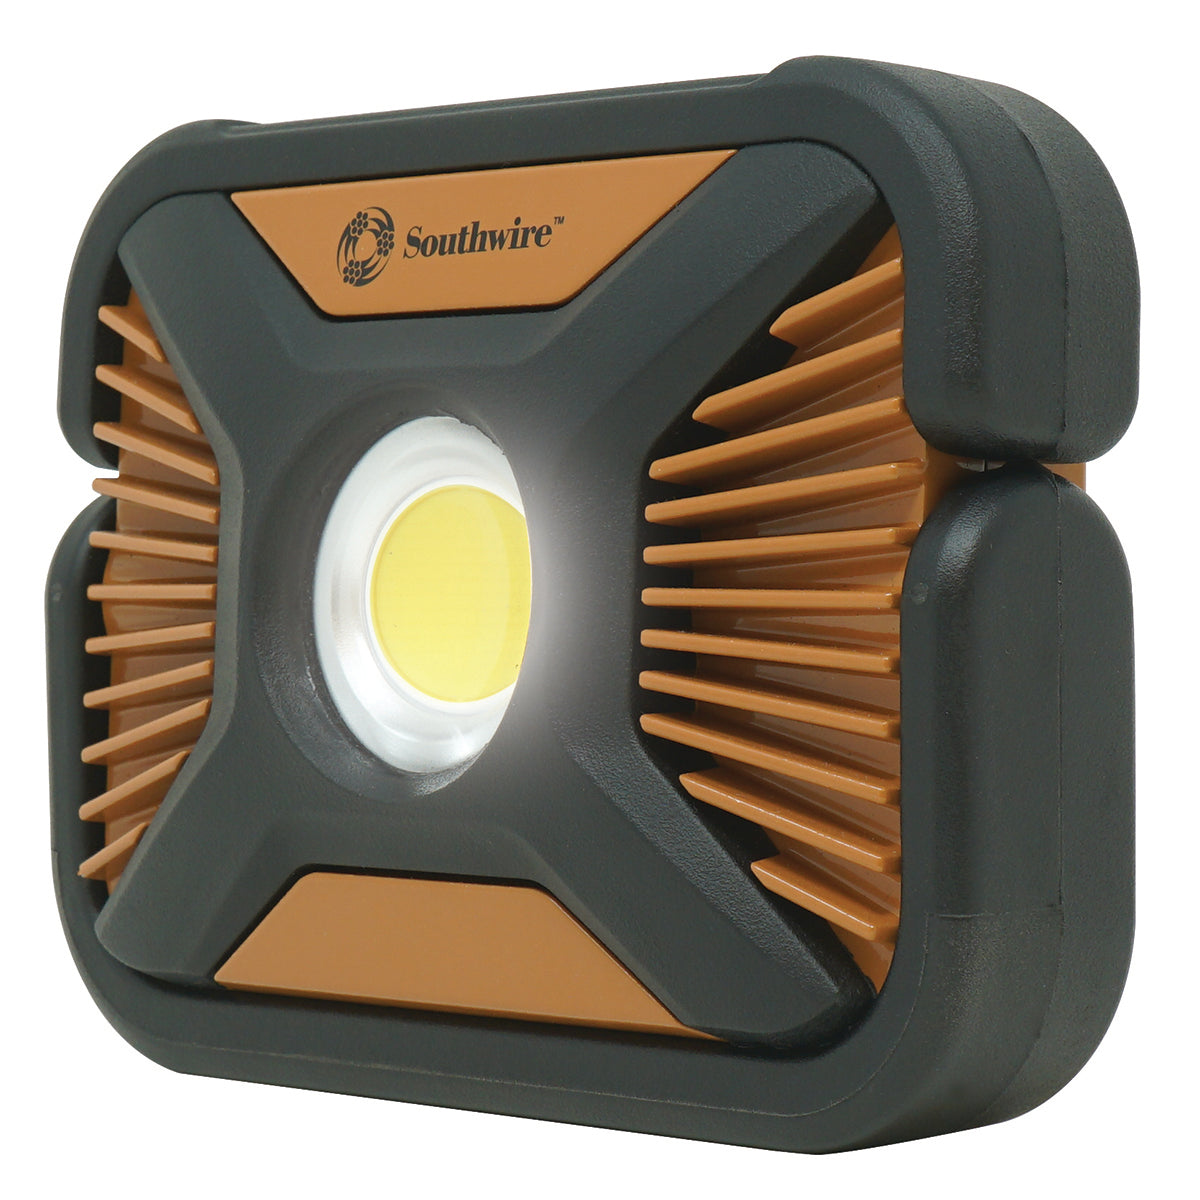 Southwire 2000 Lumens Rechargeable LED Area Light w/ Adapter